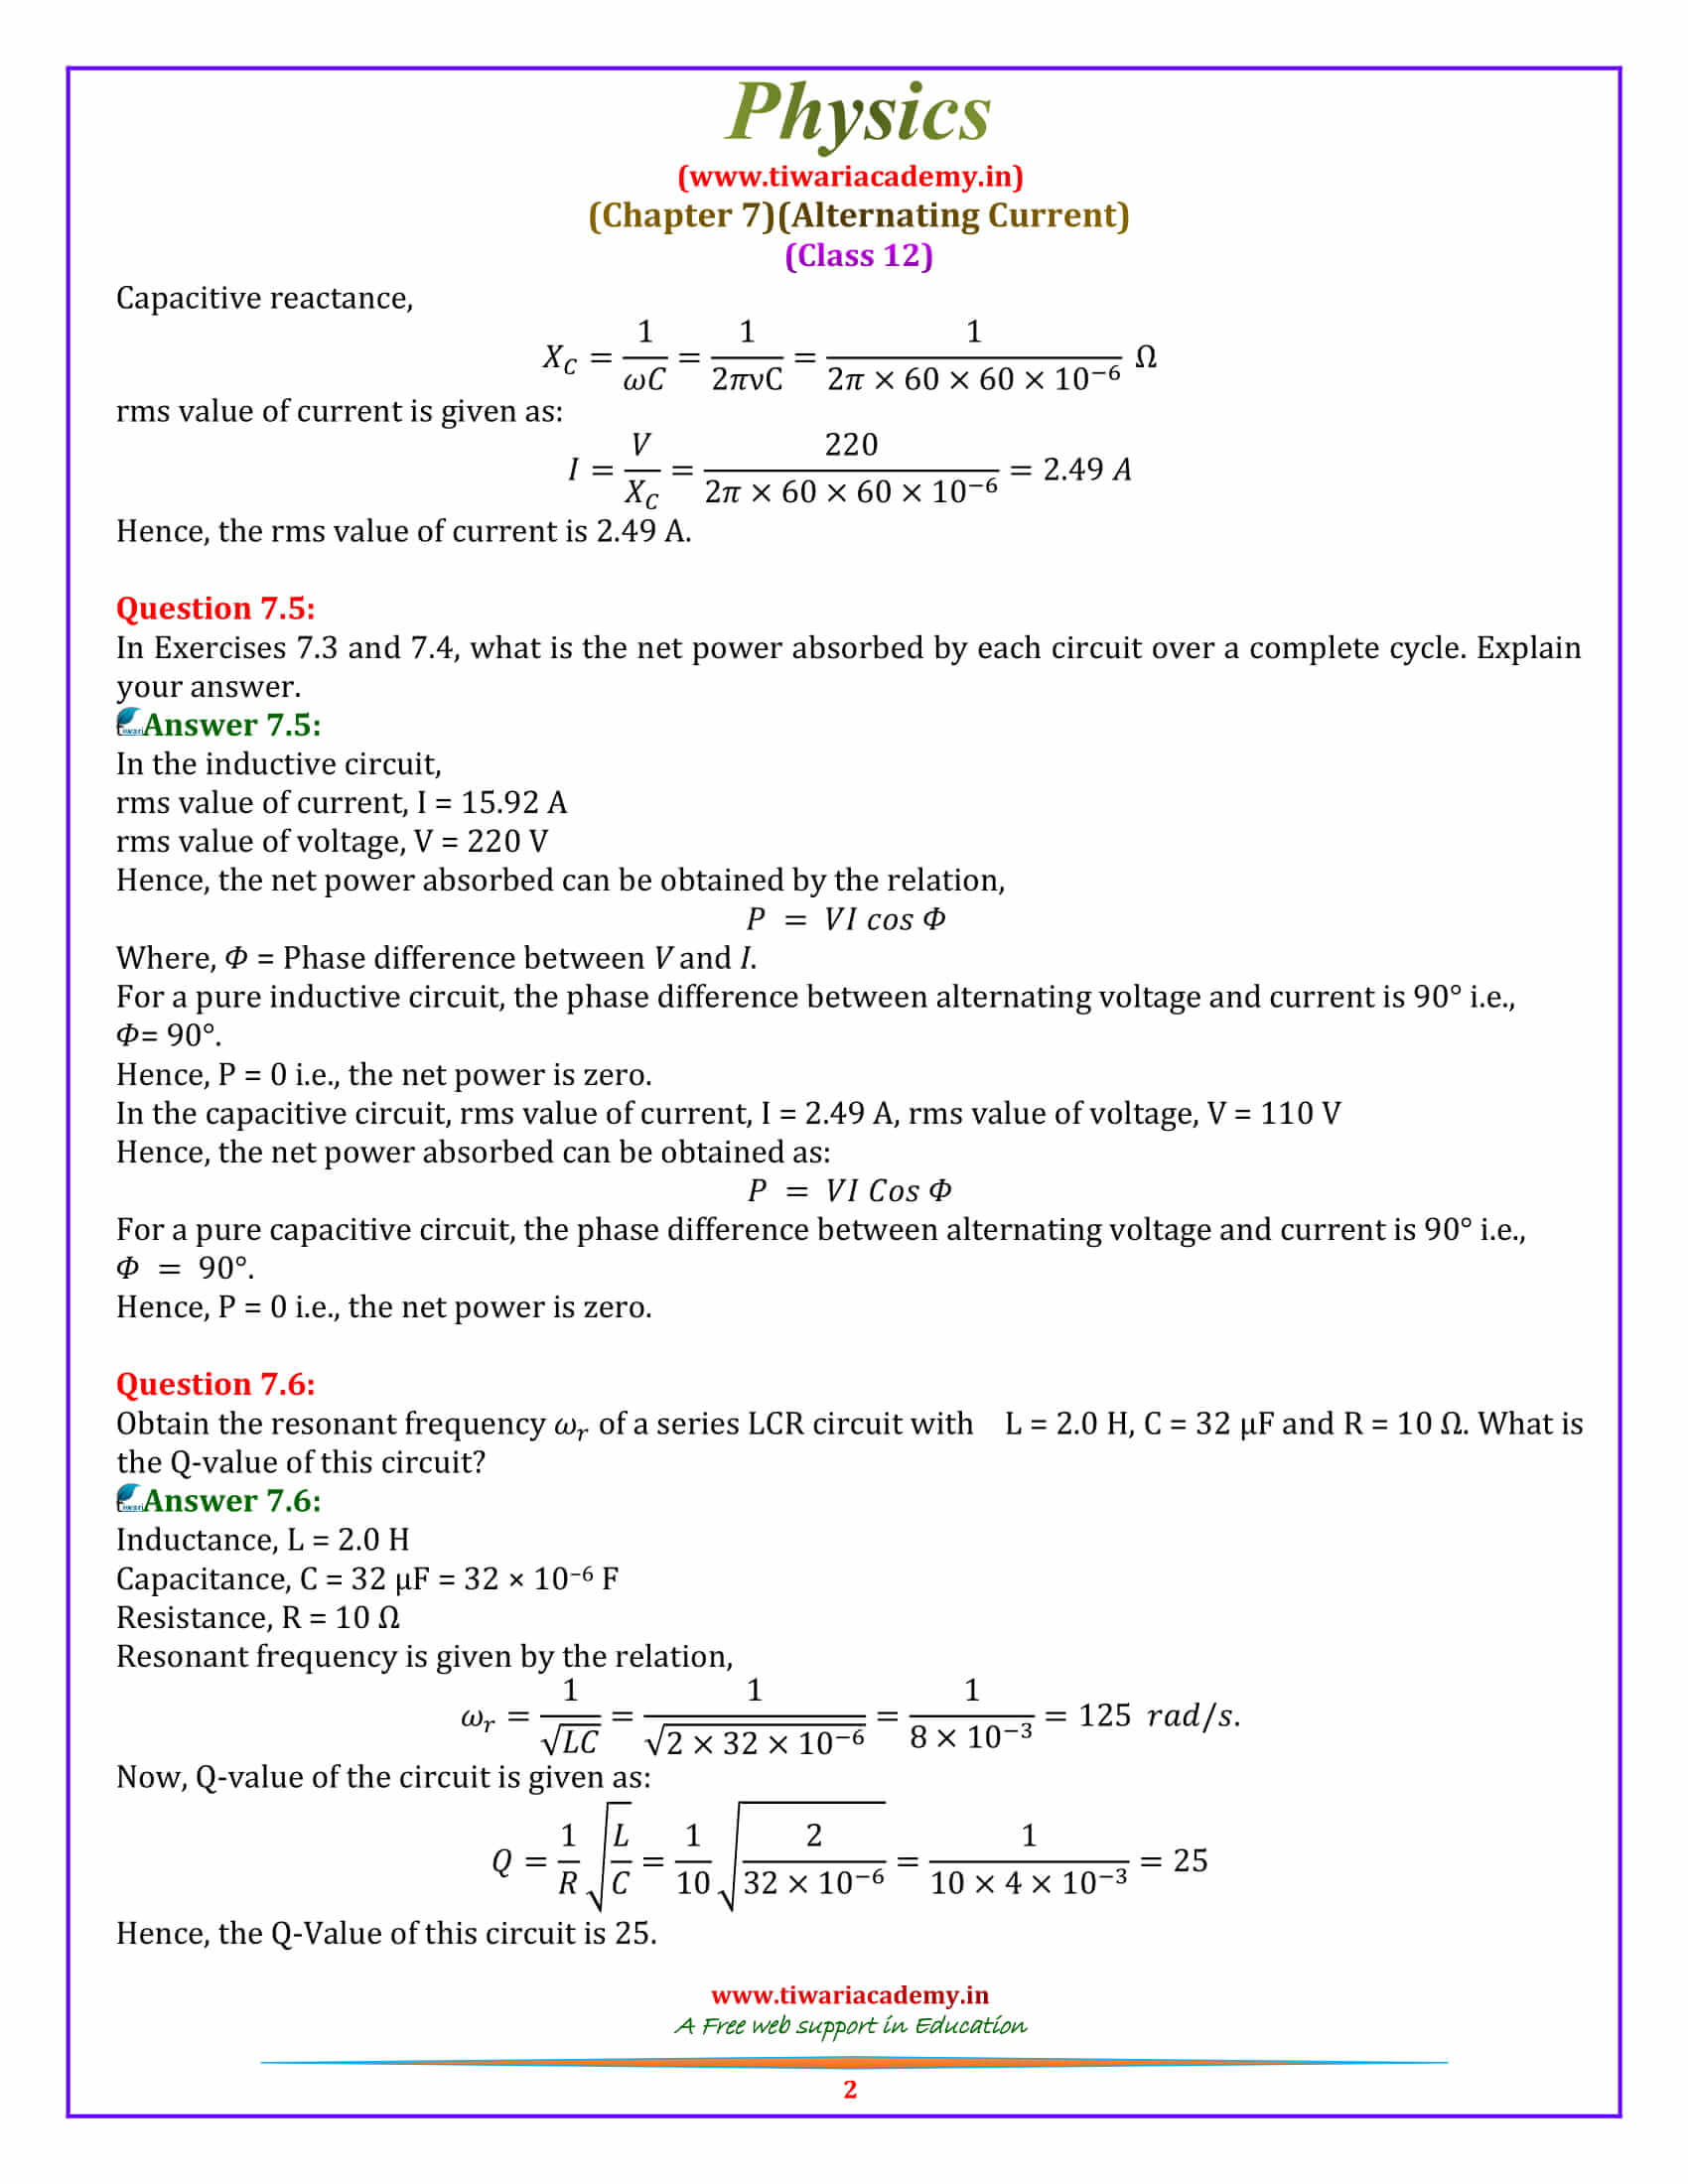 NCERT Solutions for Class 12 Physics Chapter 7 Alternating Current in pdf form